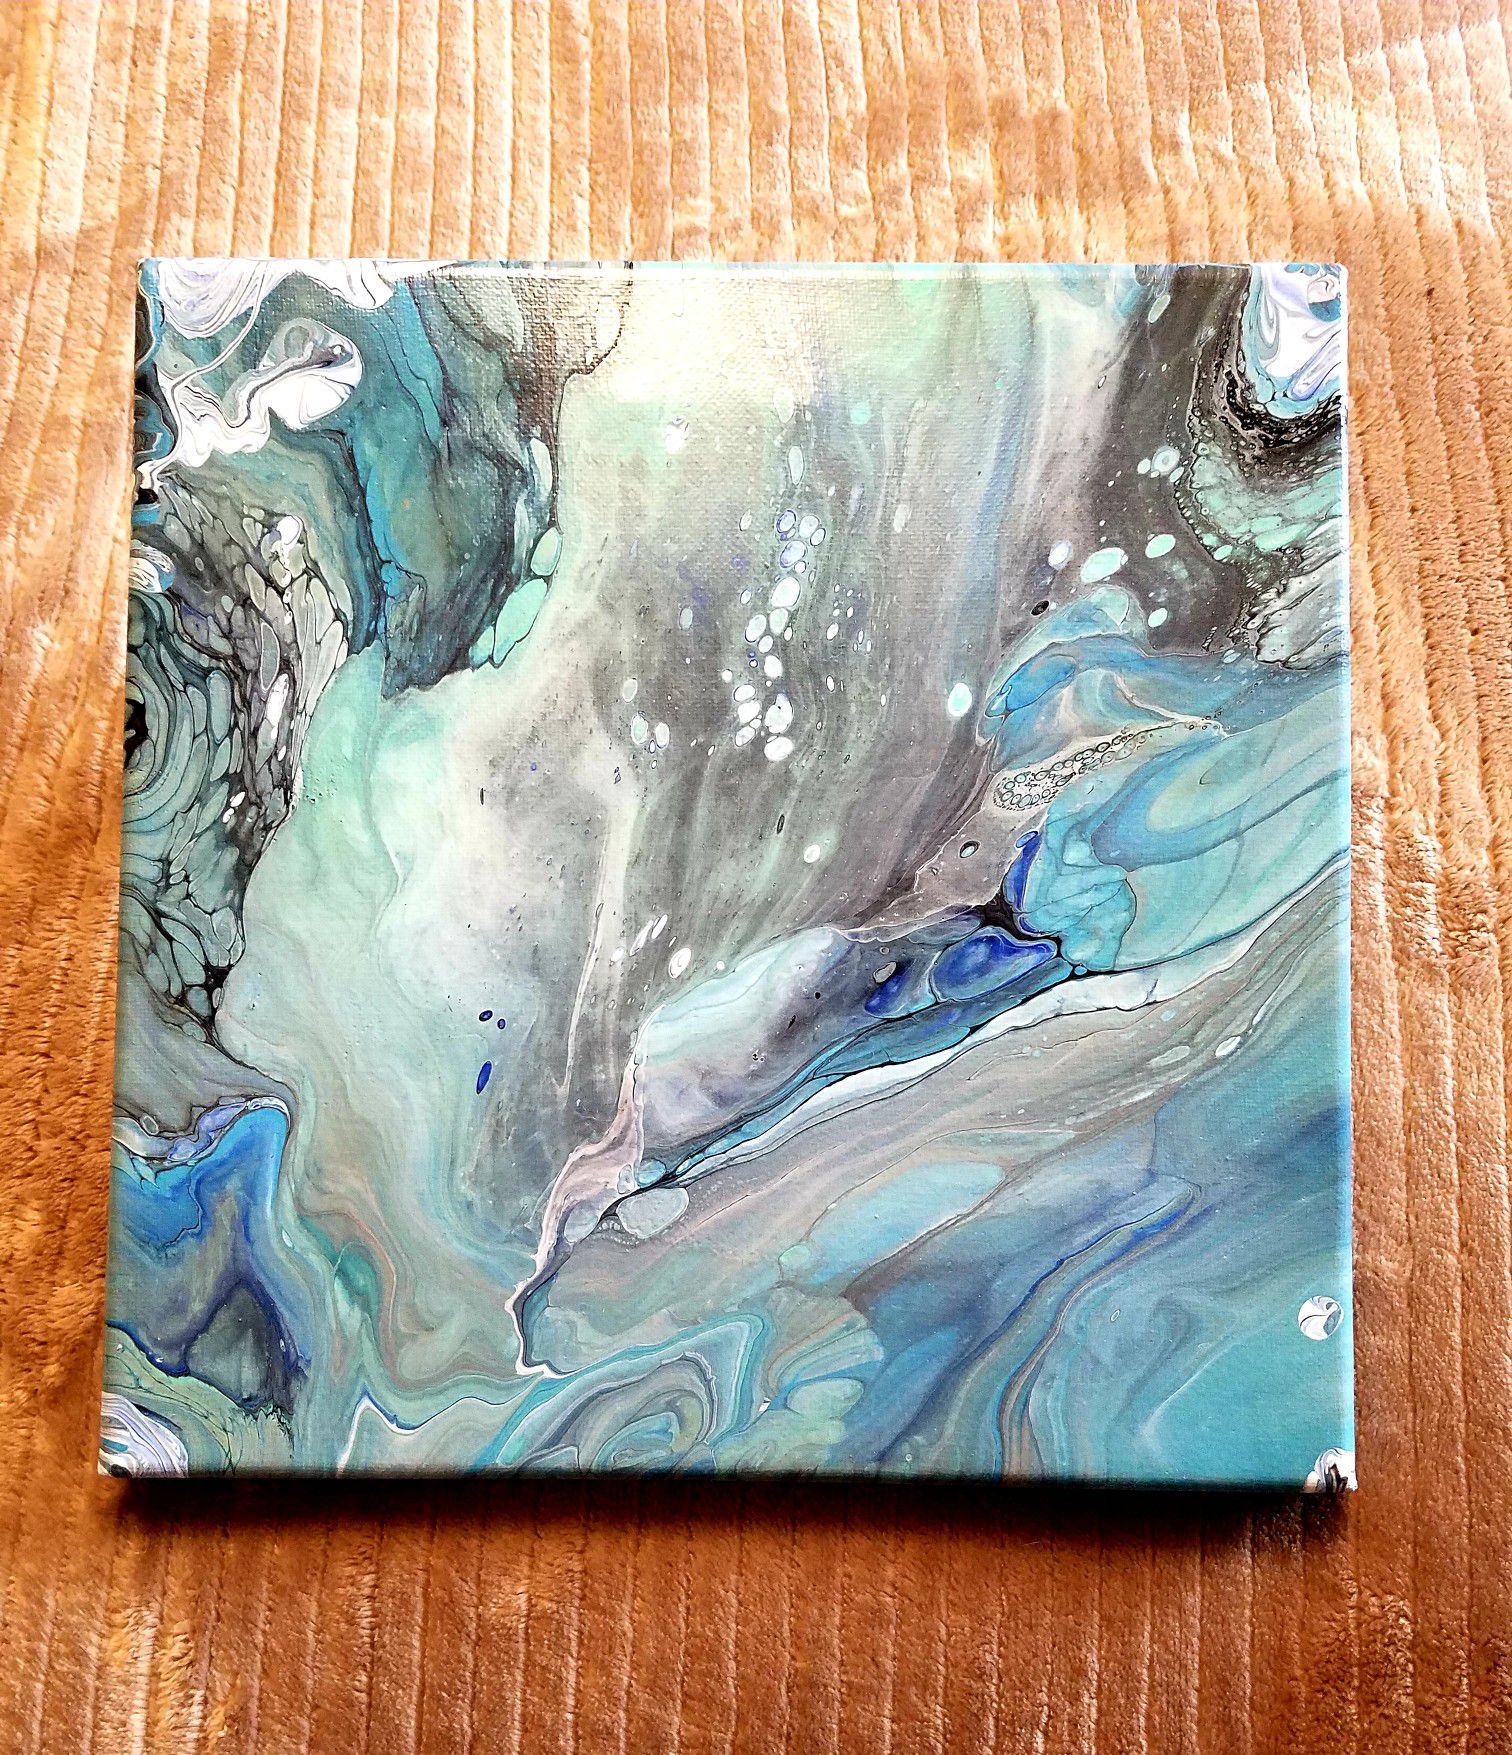 10x10 Homemade Acrylic Canvas Pour Paintings